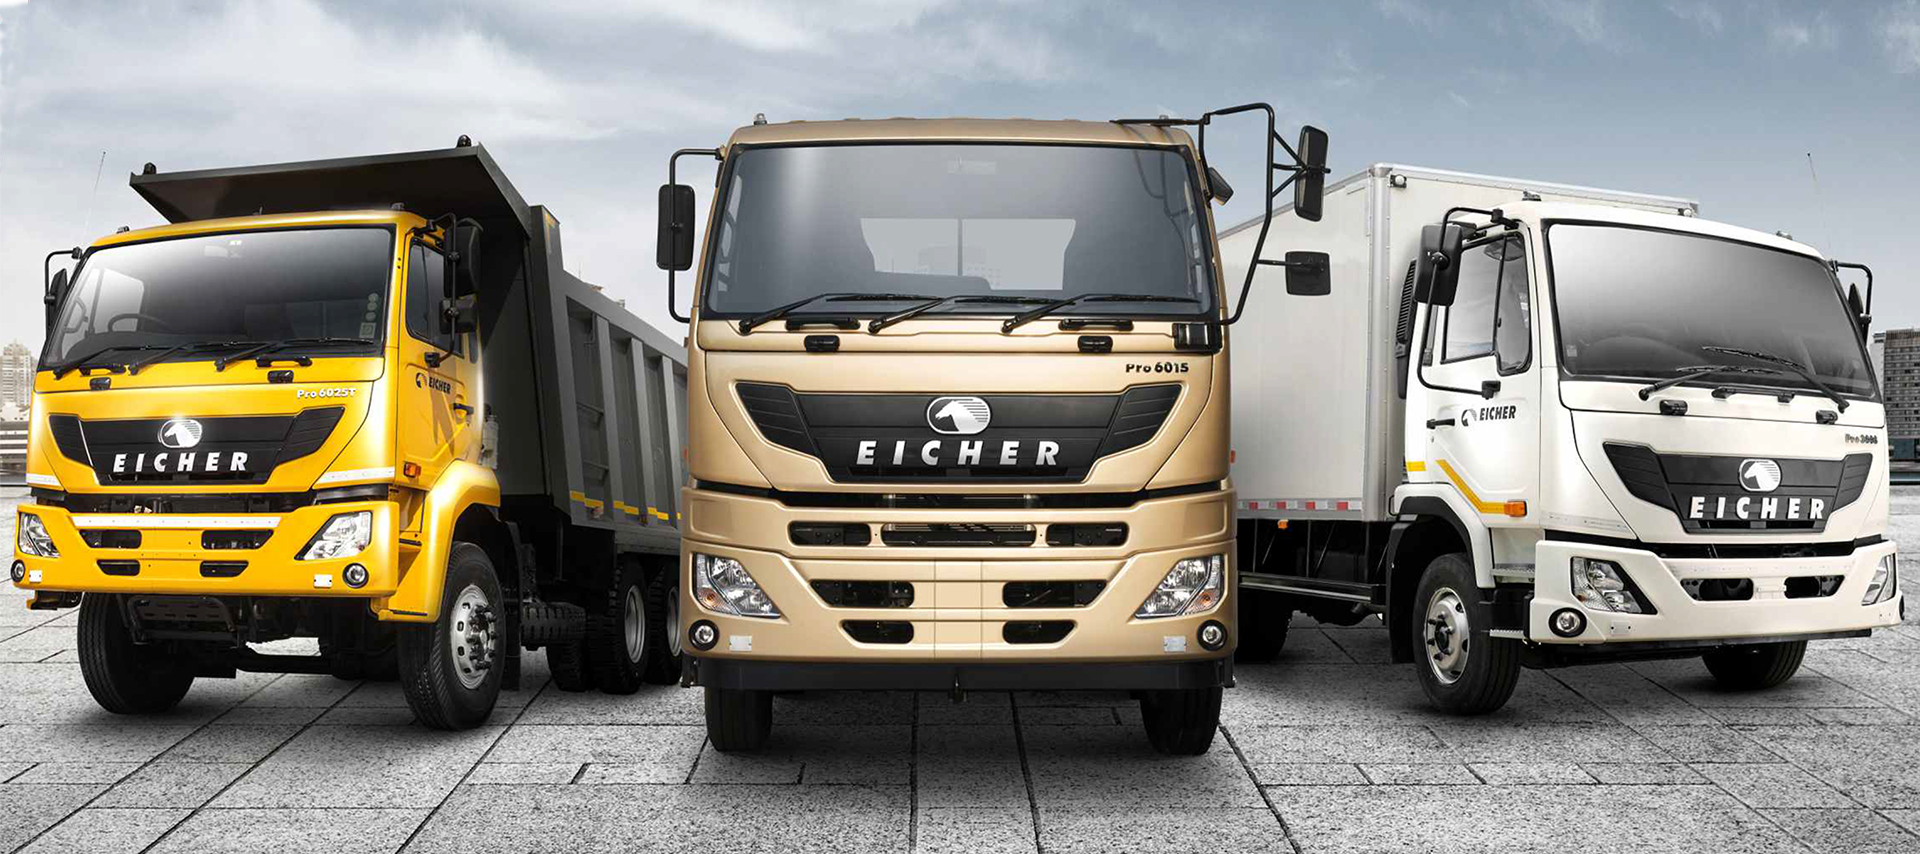 AVG Vehicle Sales & Service Pvt Ltd Dealer of Eicher Trucks and Buses, the leading brand of Volvo Group and Eicher Motors joint-venture, is driving the Future of Indian Trucking with the next-gen vehicles and innovative support solutions.